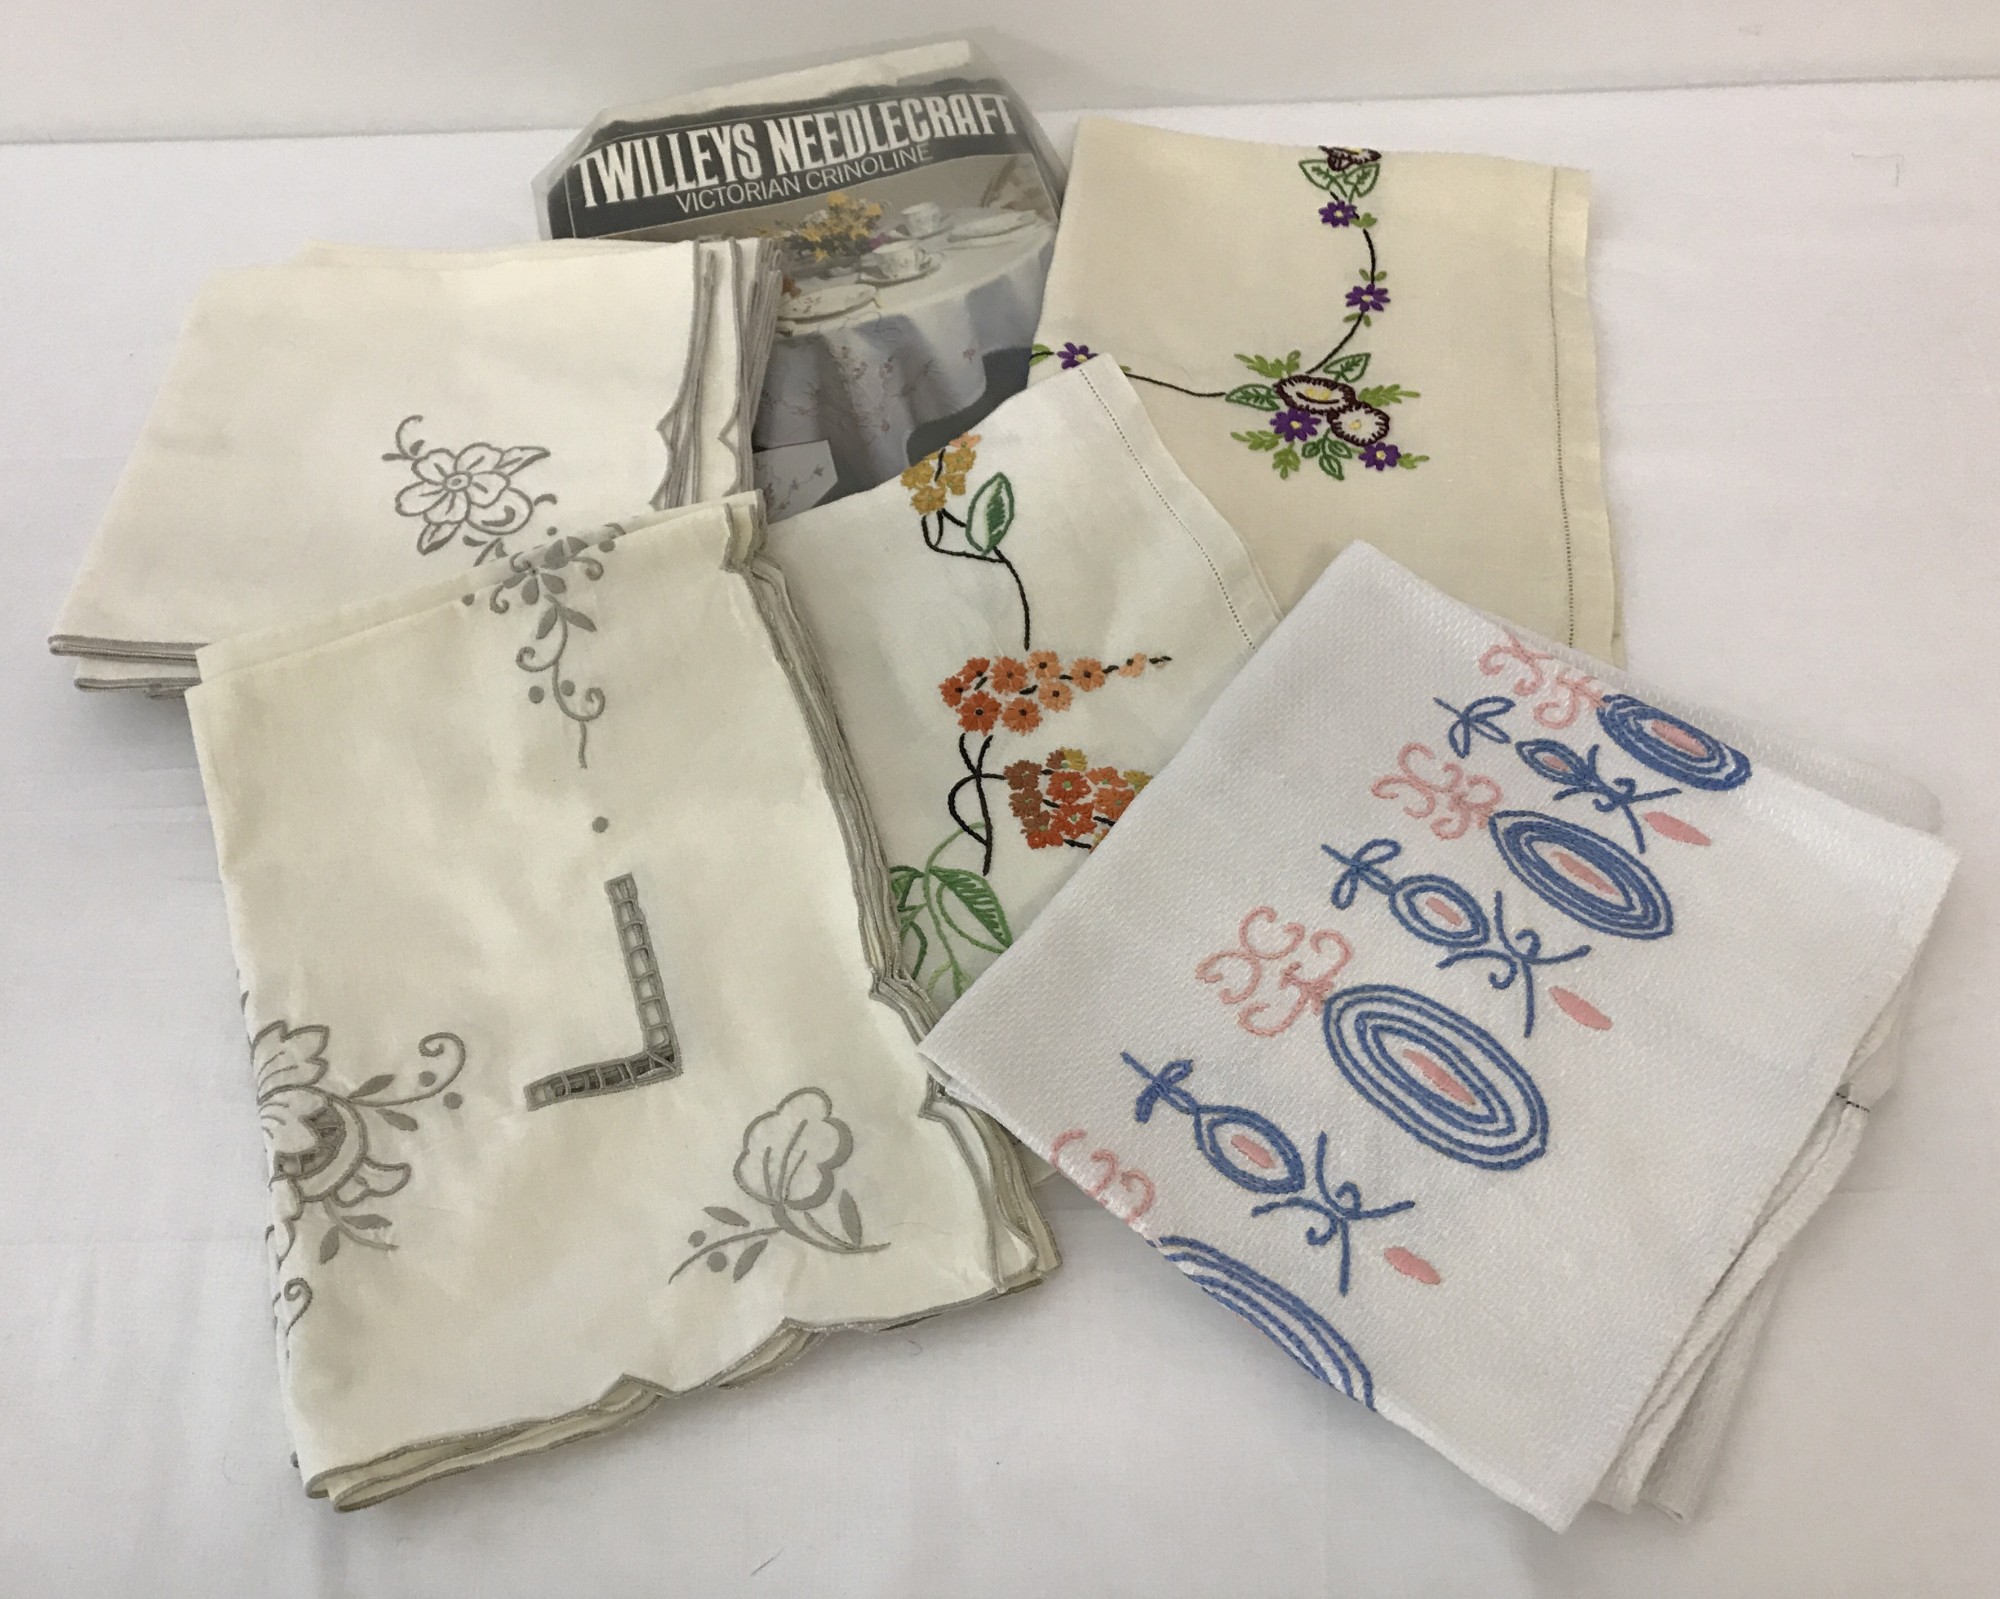 A small collection of vintage linen items.